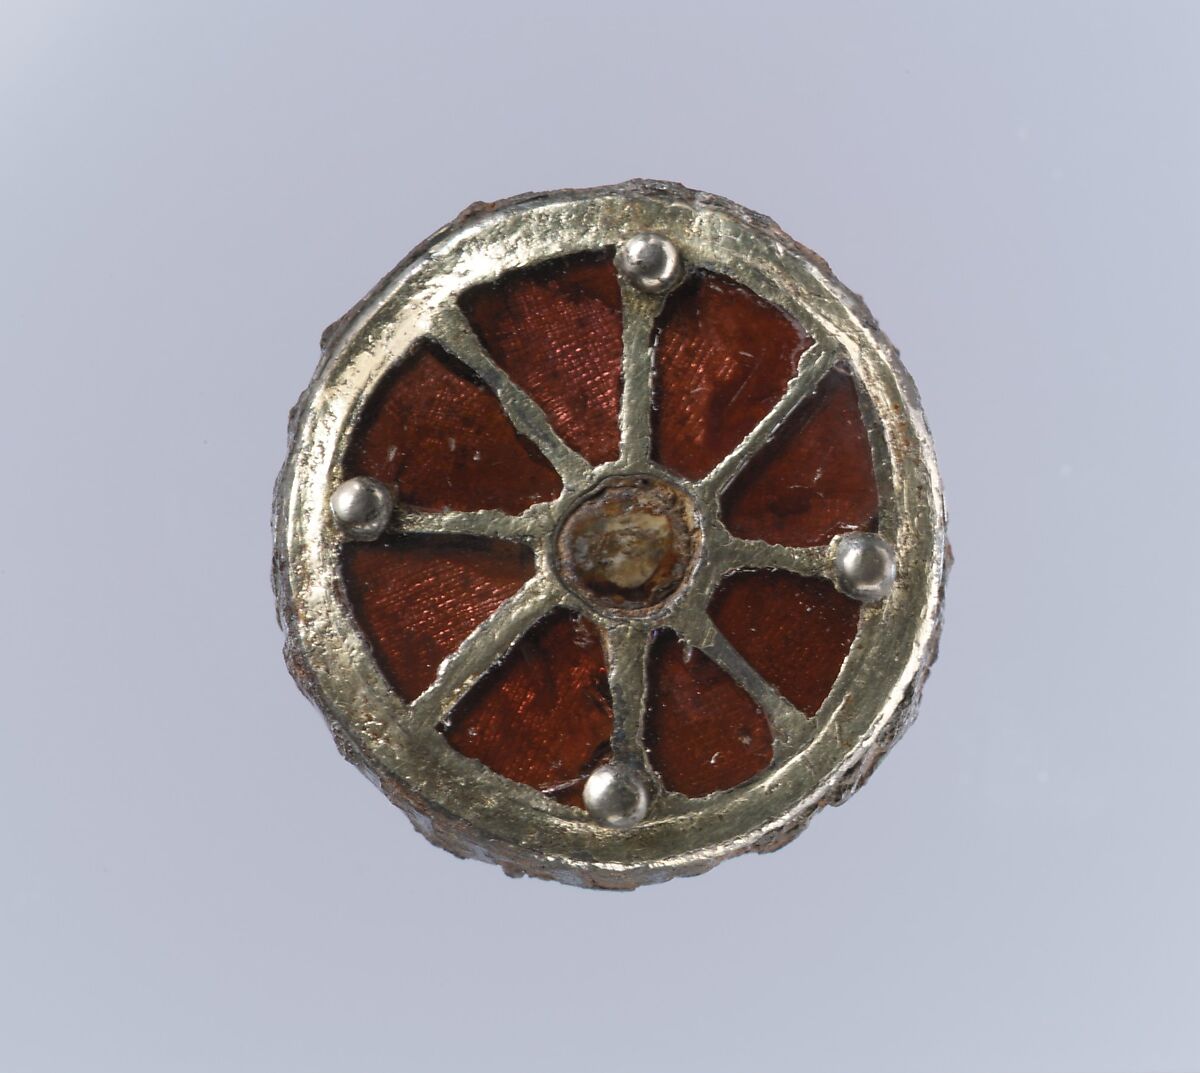 Disk Brooch, Silver-gilt, garnets with patterned foil backings, mother-of-pearl(?).., Frankish 